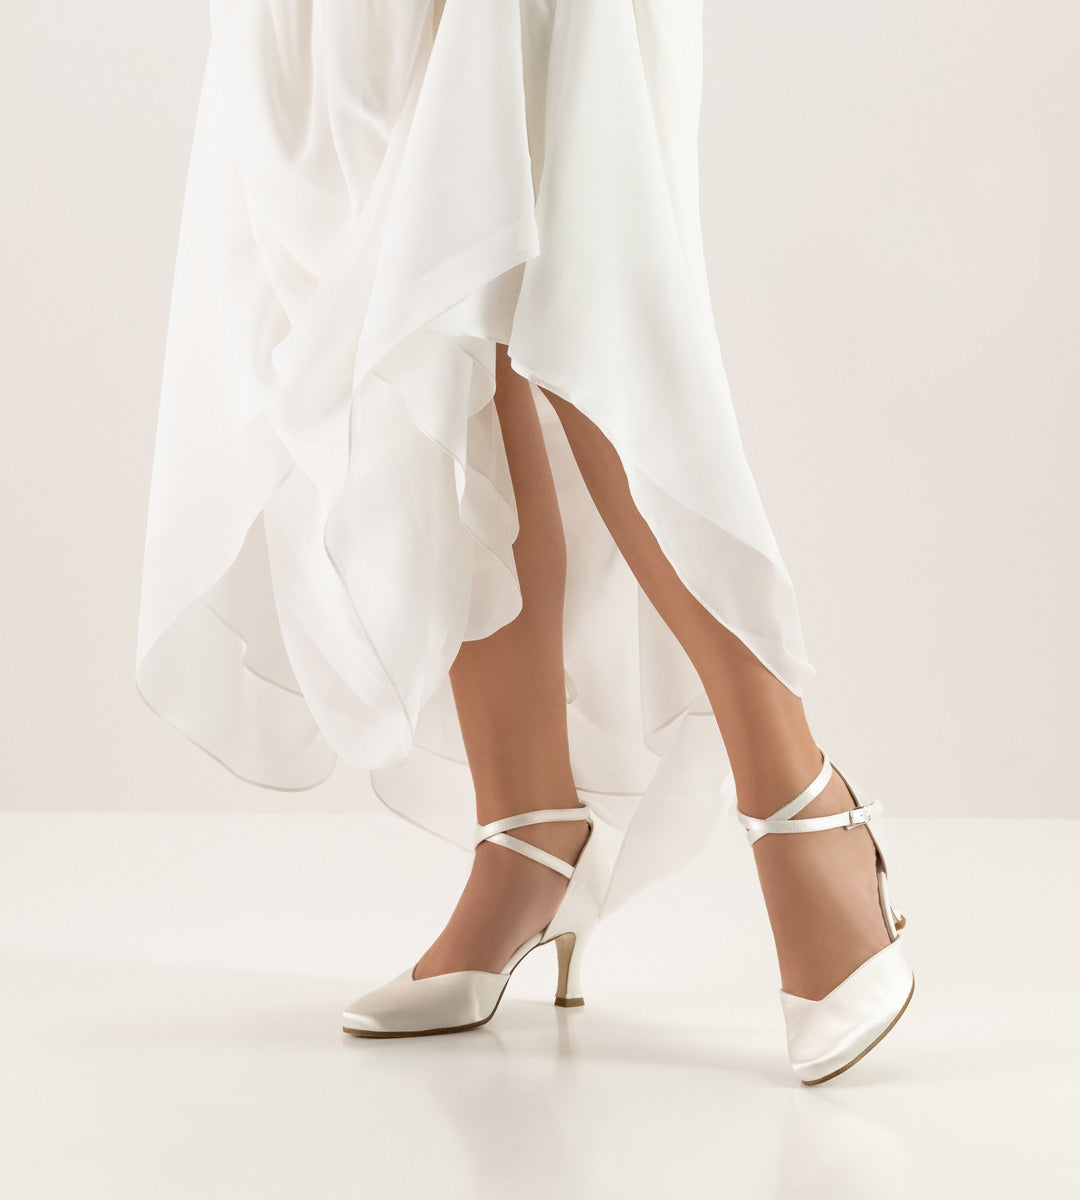 Werner Kern Betty Bridal Ballroom Shoes in White Satin with Dancing Soles or Leather Soles